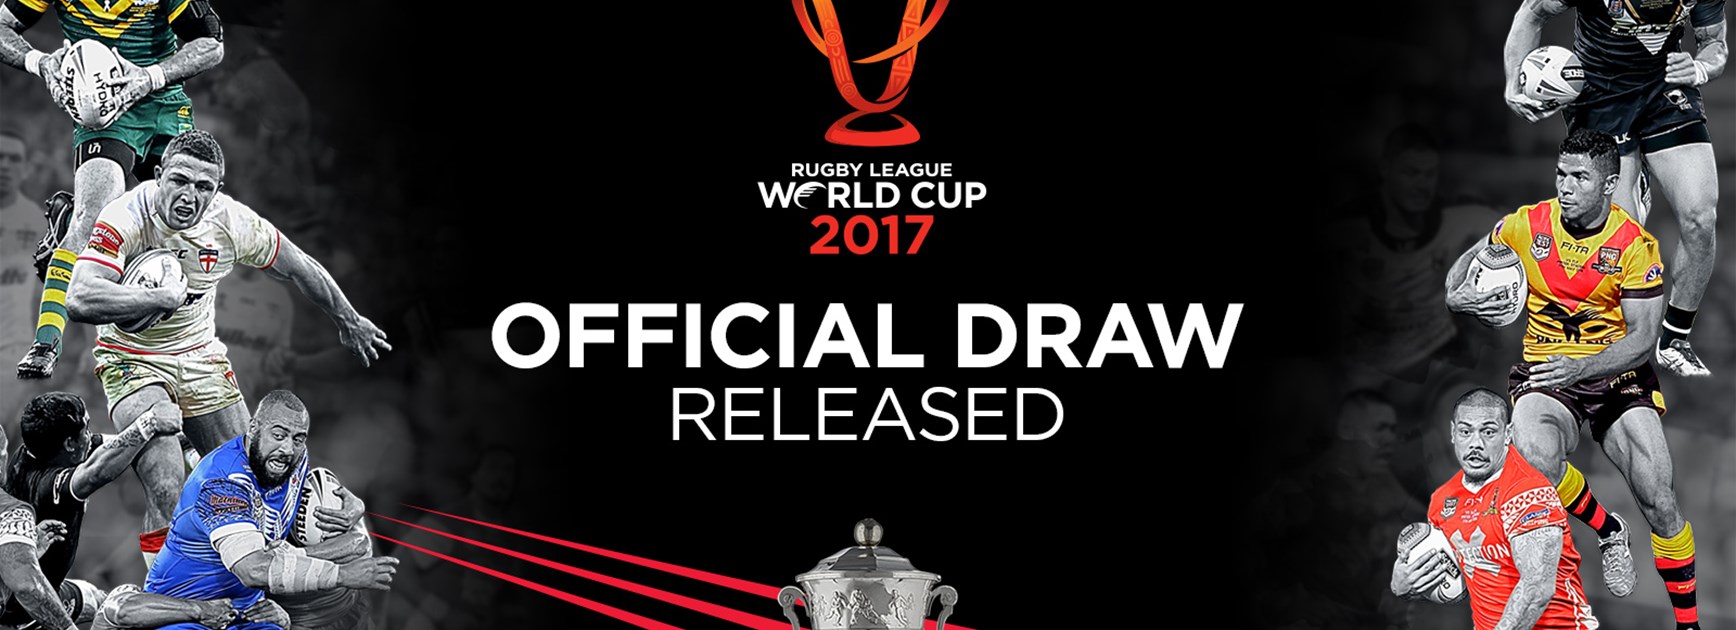 The 2017 Rugby League World Cup draw has been released.